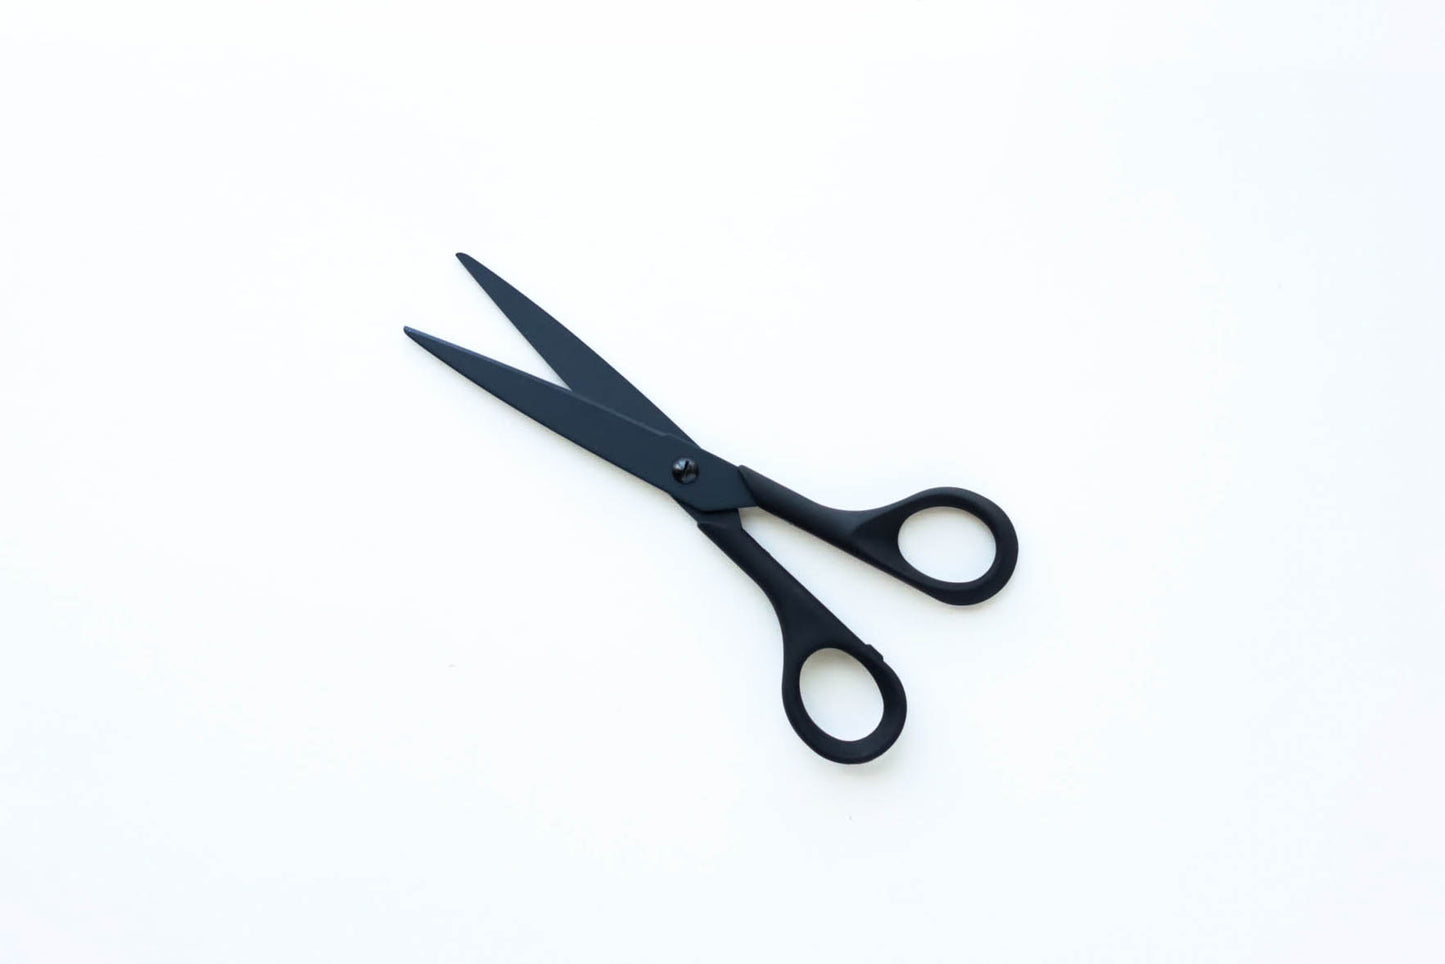  ALLEX Japanese Office Scissors for Desk, Extra Large 7.8 All  Purpose Scissors, Made in JAPAN, All Metal Sharp Japanese Stainless Steel  Blade with Non-Slip Soft Ring, Black : Office Products